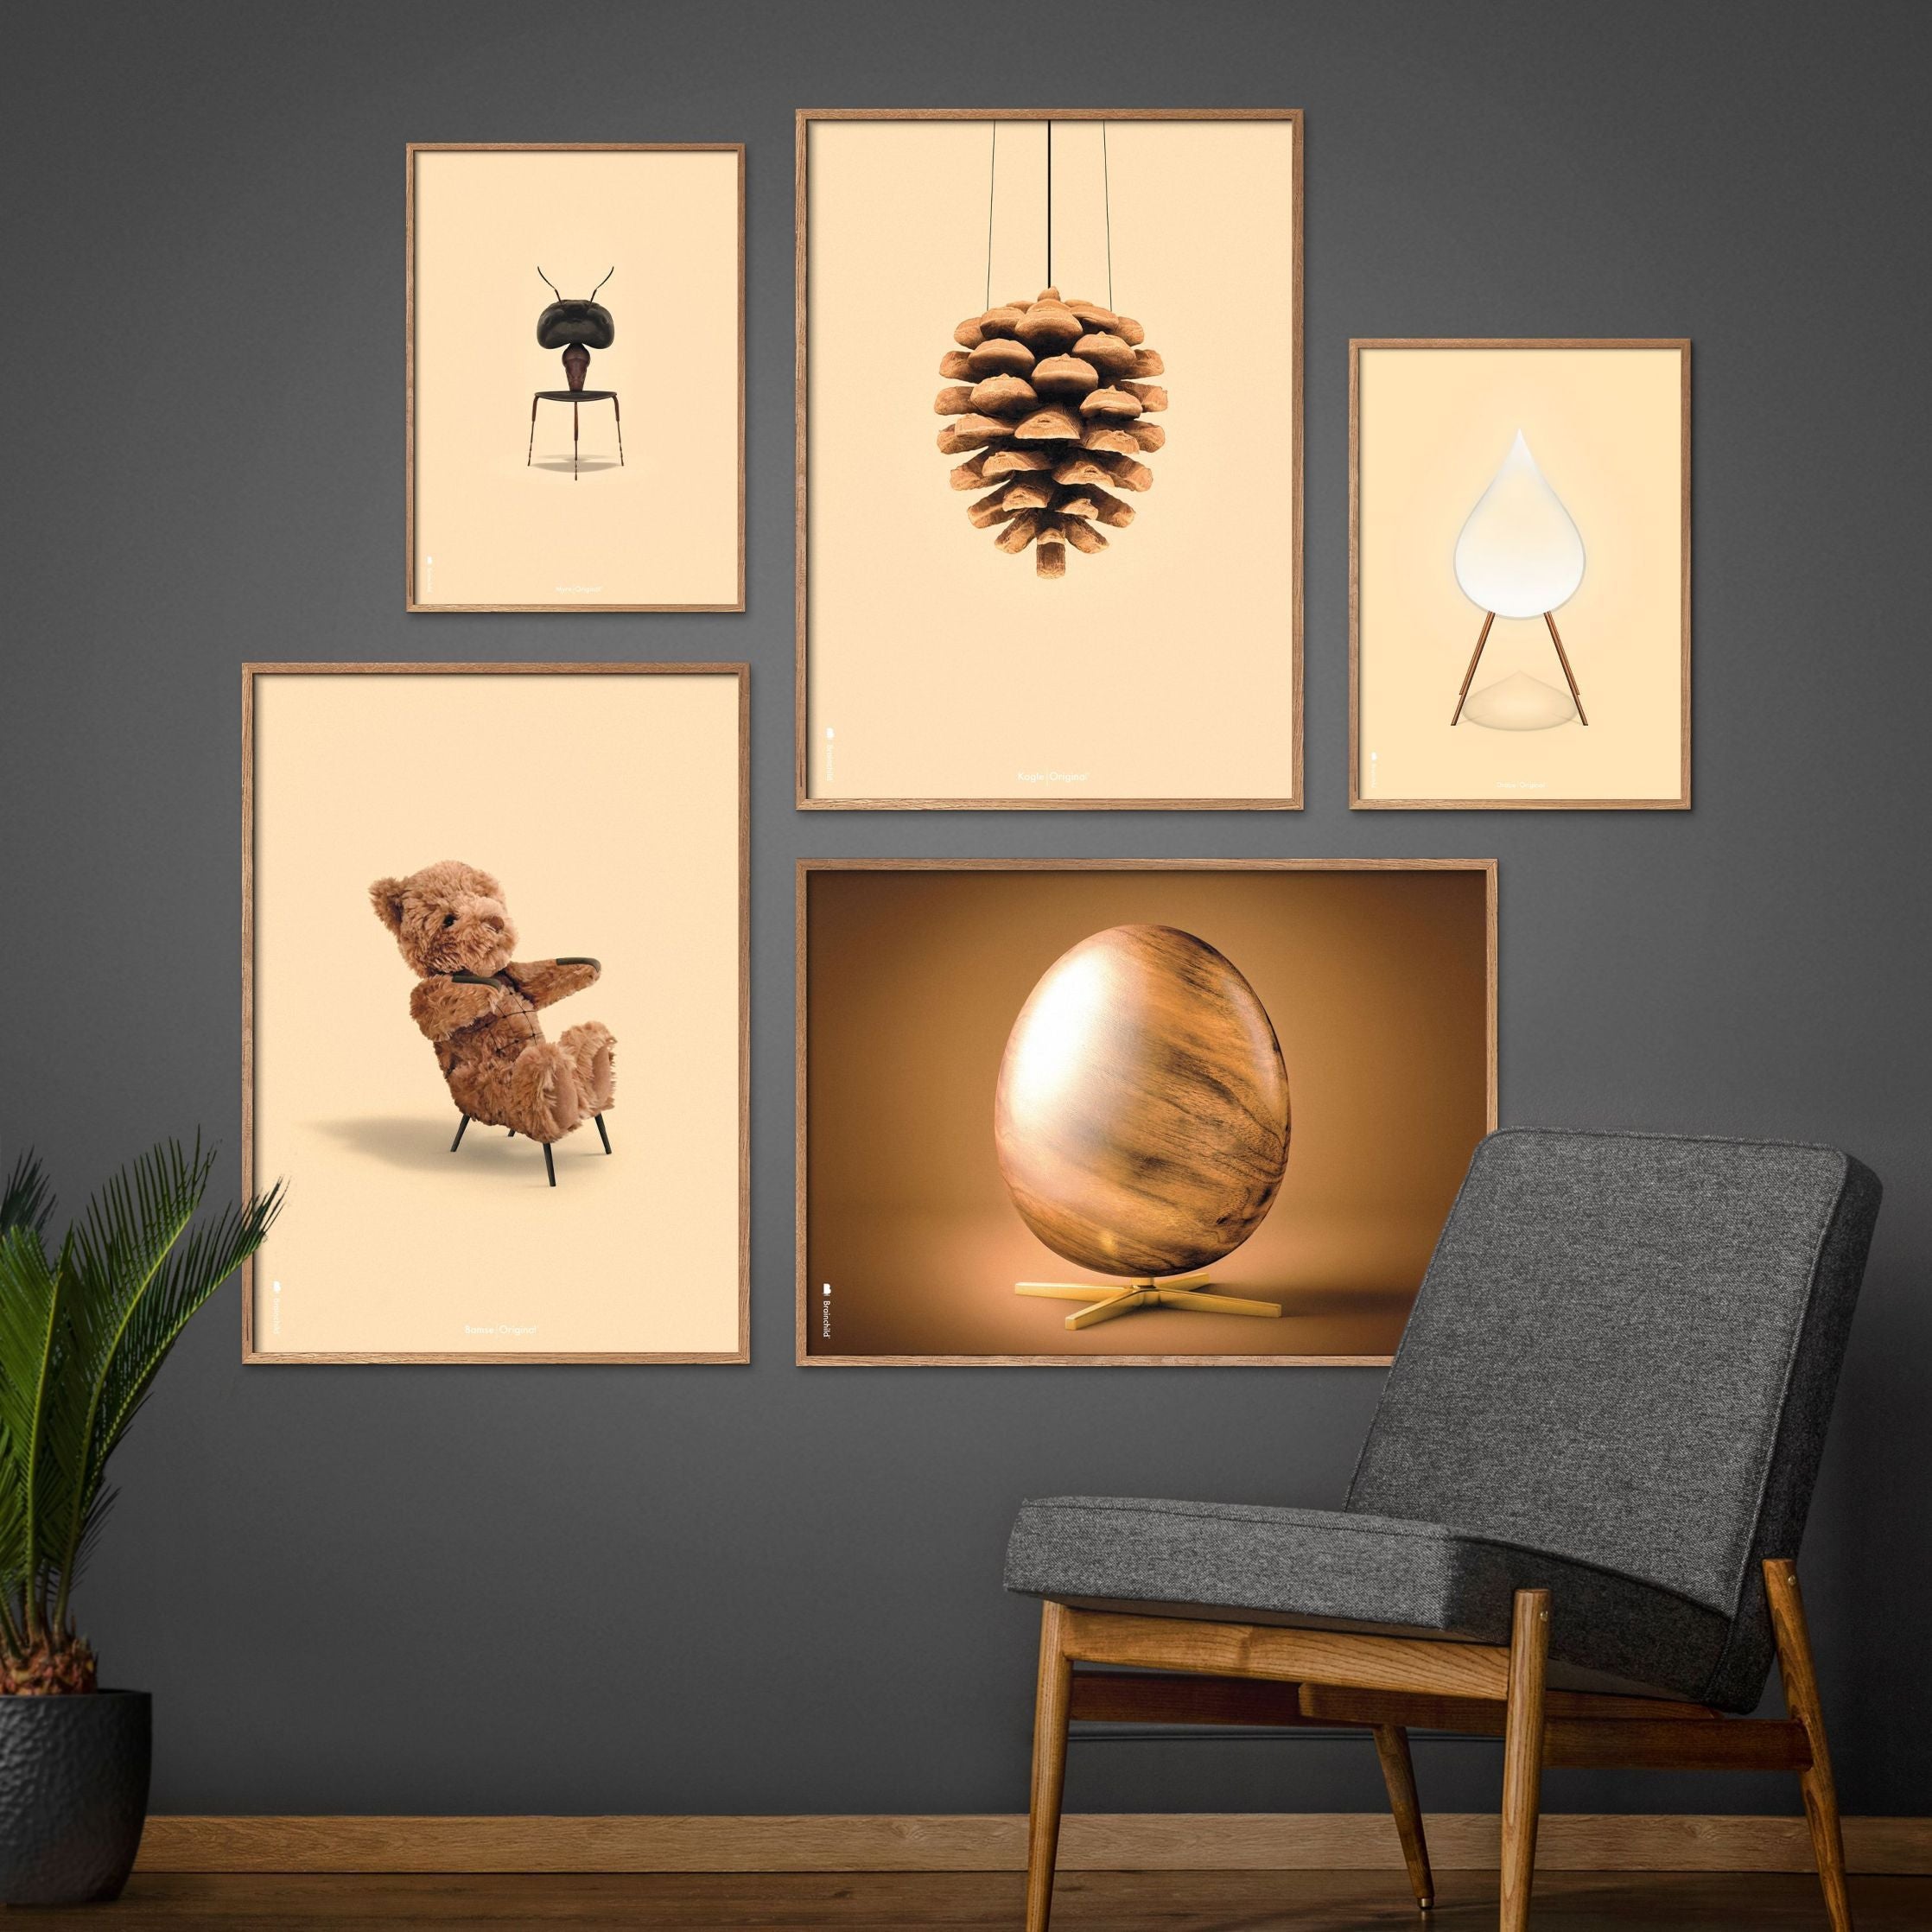 Brainchild Drop Classic Poster, Frame In Black Lacquered Wood 70x100 Cm, Sand Colored Background